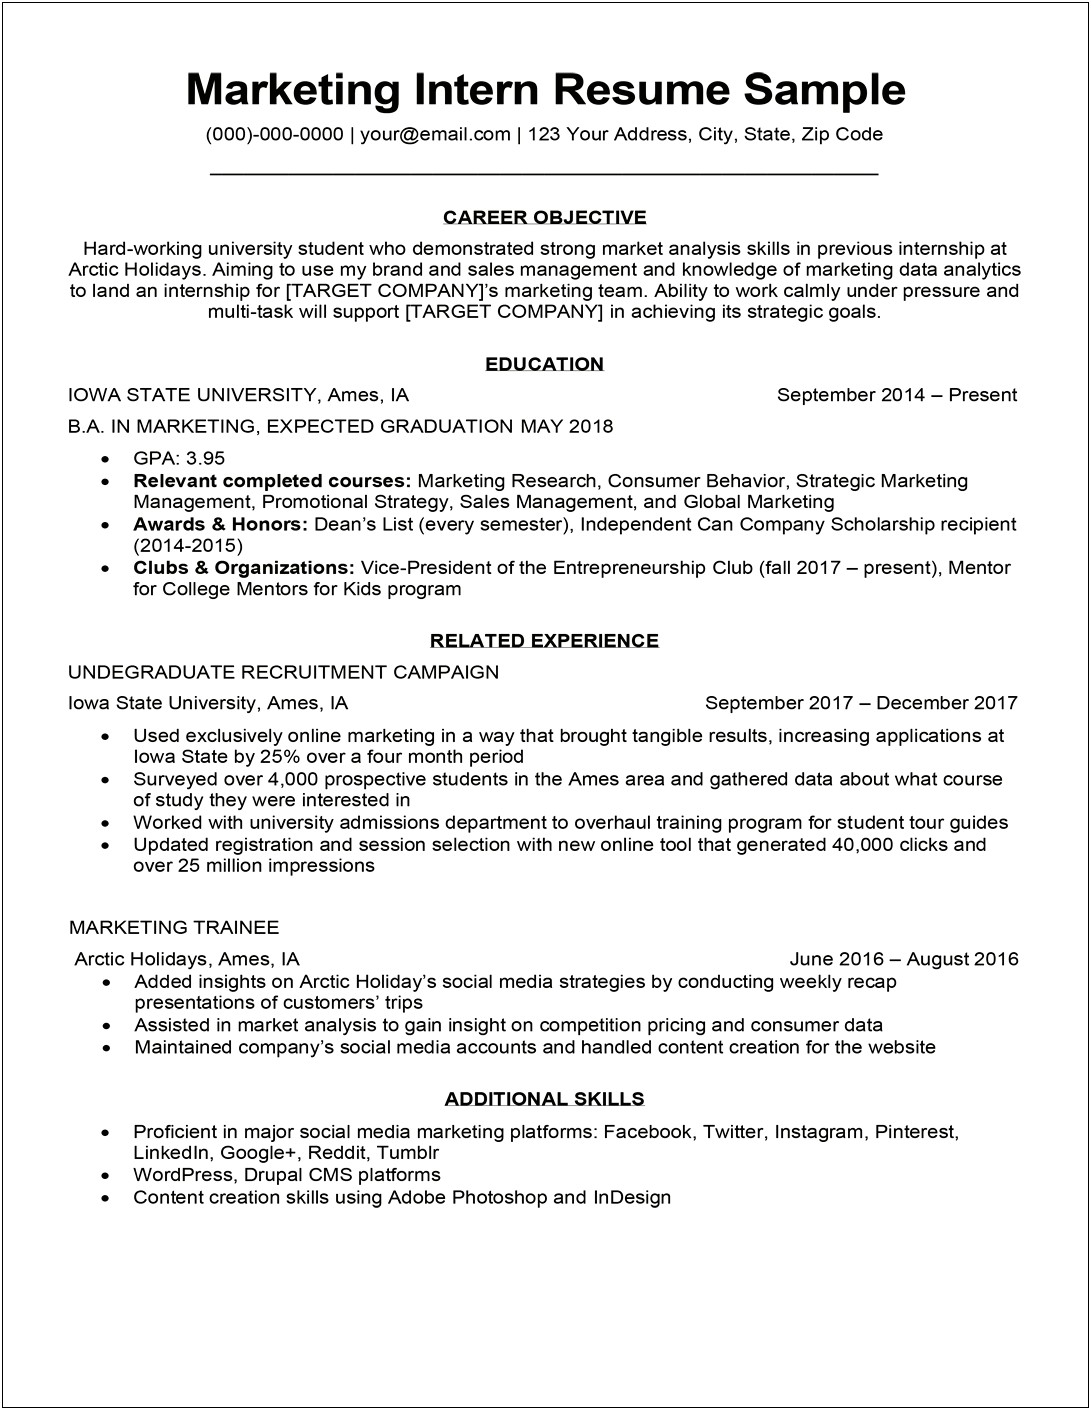 Skills And Abilities For Marketing Resume